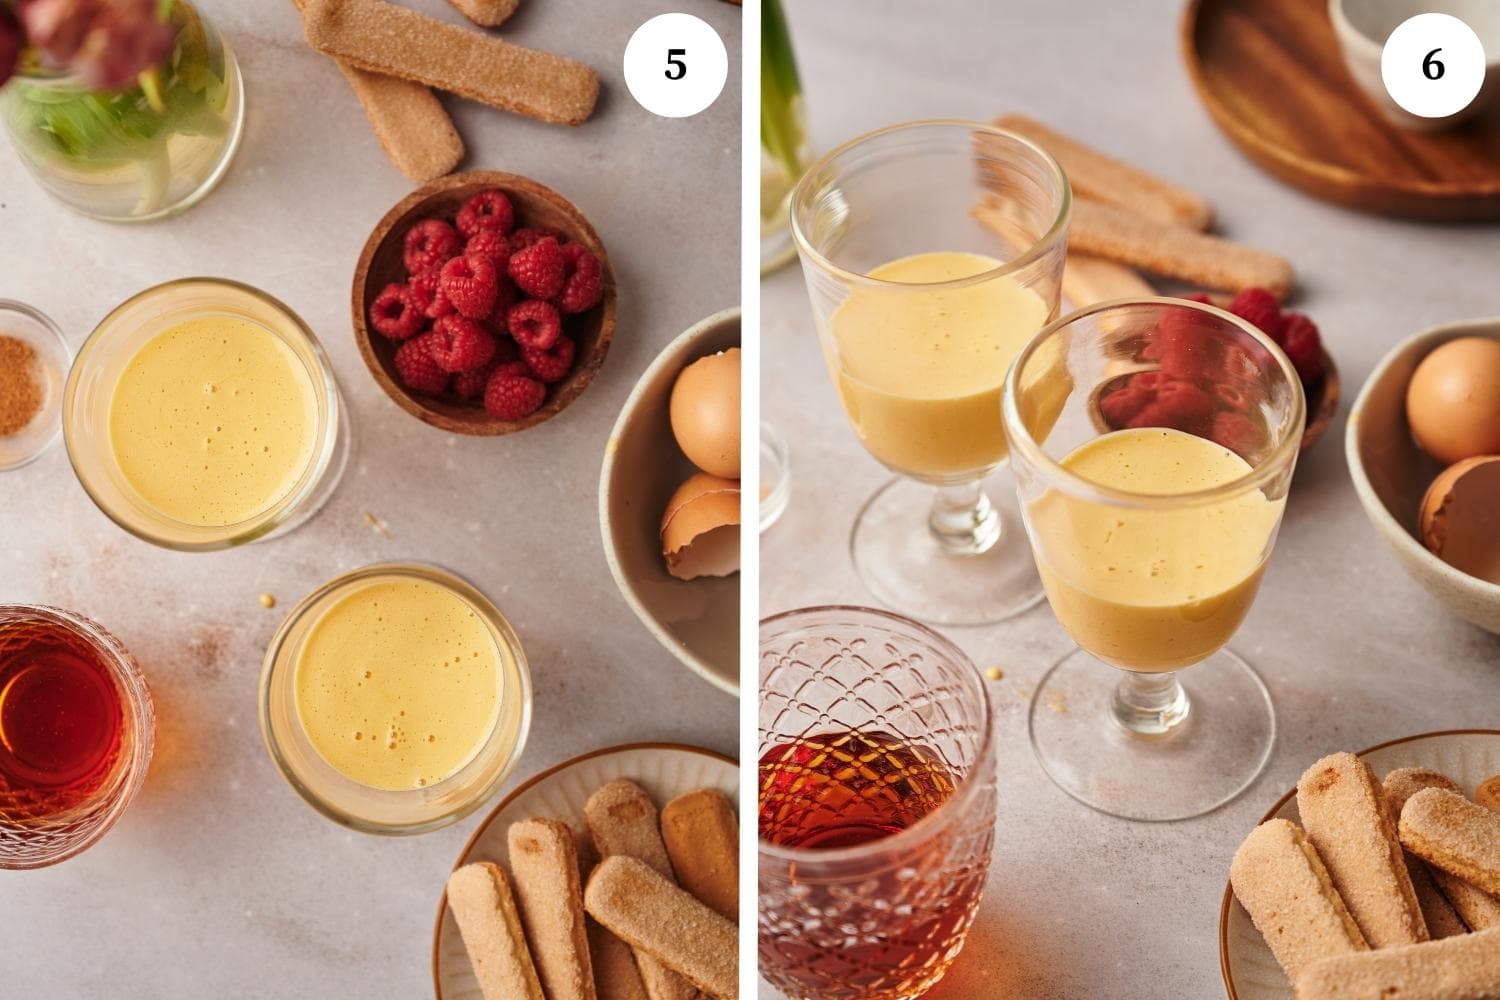 zabaglione recipe step by step, servings suggestions
